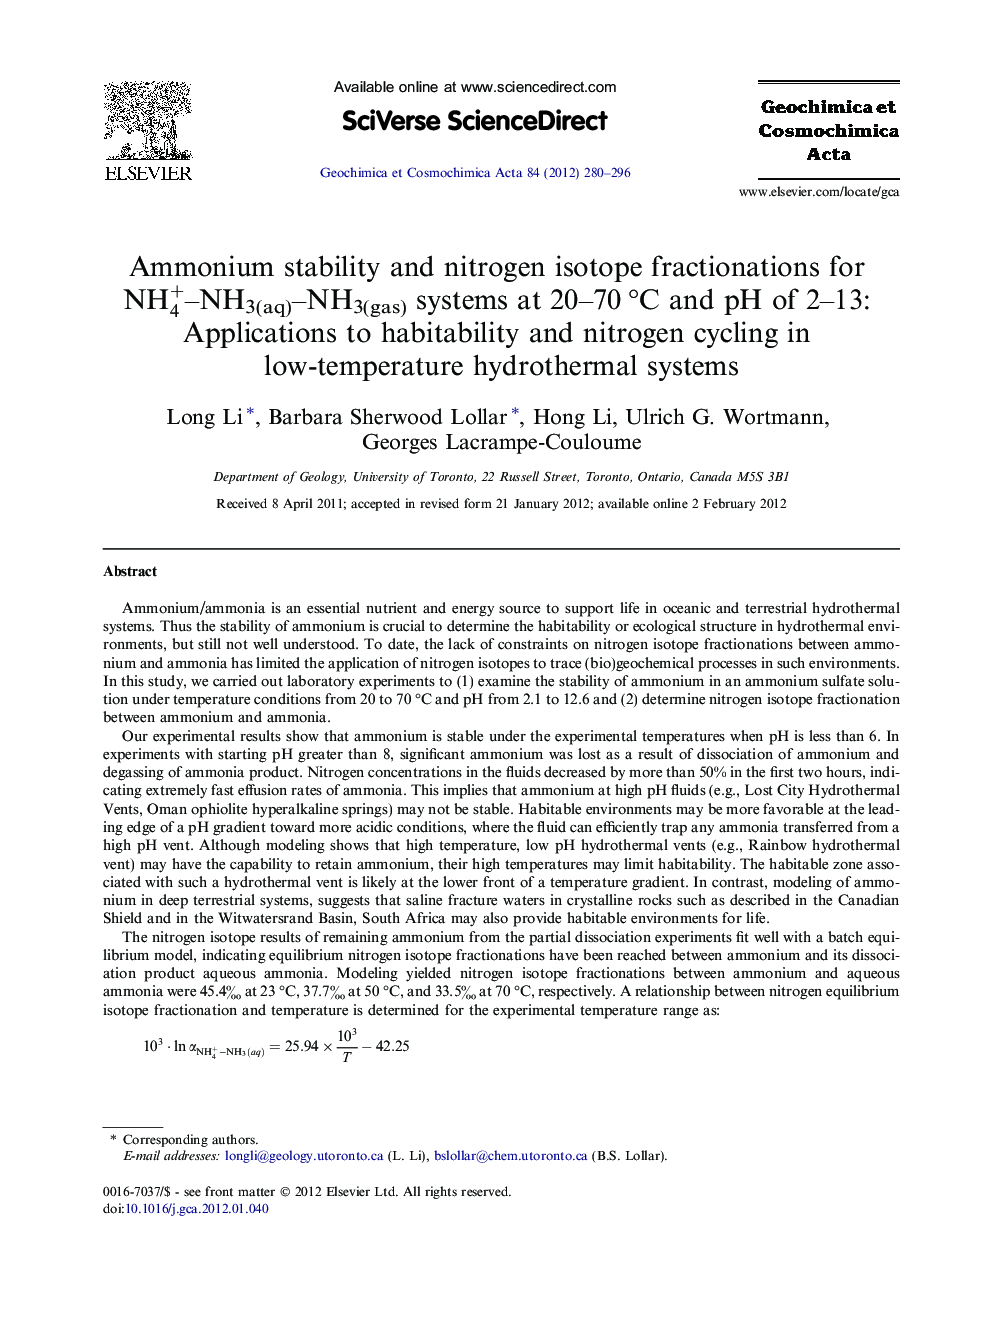 Ammonium stability and nitrogen isotope fractionations for NH4+–NH3(aq)–NH3(gas) systems at 20–70 °C and pH of 2–13: Applications to habitability and nitrogen cycling in low-temperature hydrothermal systems